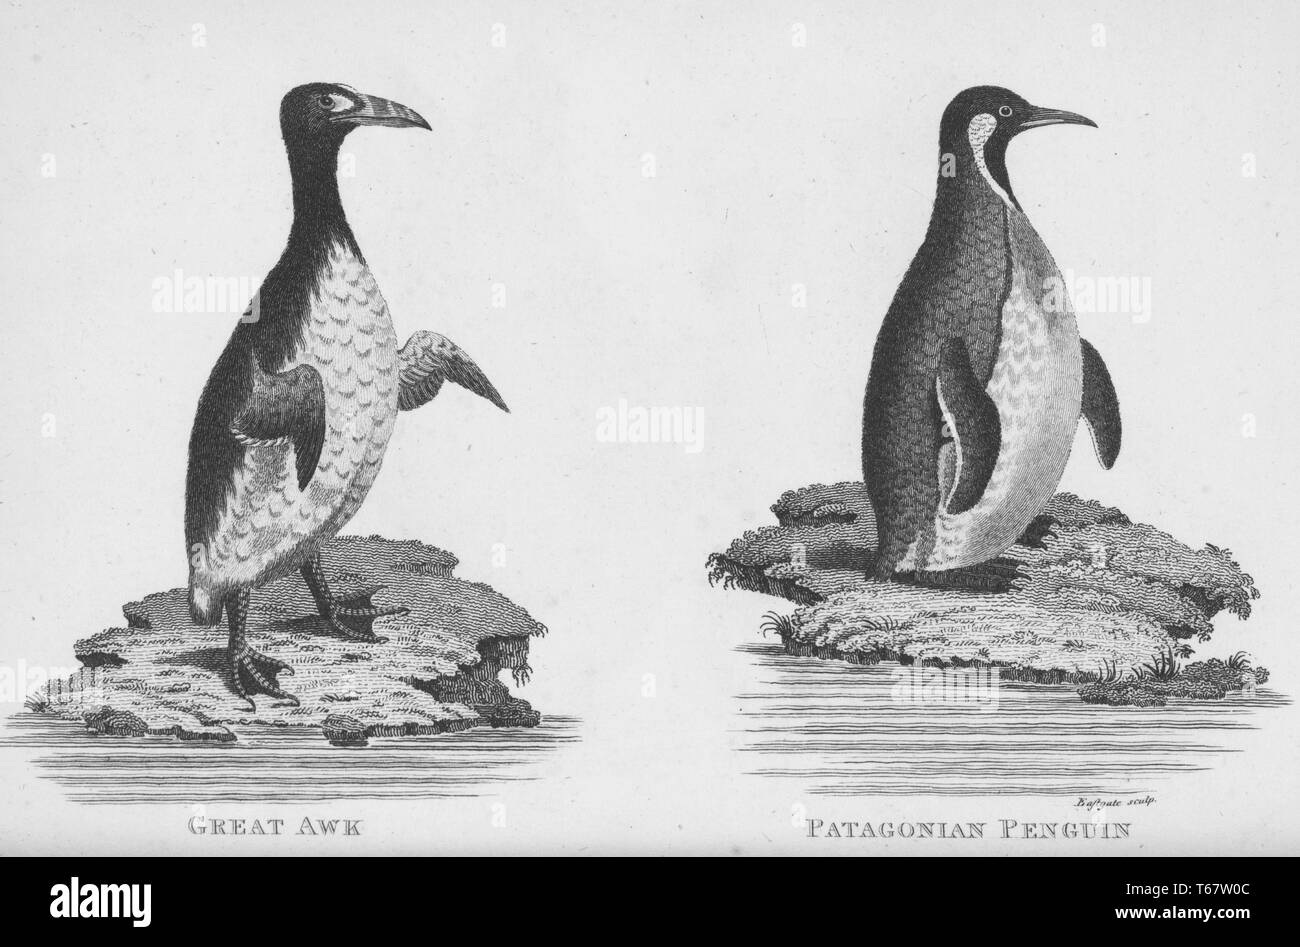 Two engravings from a book about the zoological lectures delivered by George Shaw at the Royal Institution of Great Britain, Shaw was a British botanist and zoologist who published several books, the image on the left portrays a great auk which was a flightless bird and the only modern penguin, the image on the right shows a Patagonian penguin which are penguin species native to South America and are classified as a threatened species, 1809. From the New York Public Library. Stock Photo